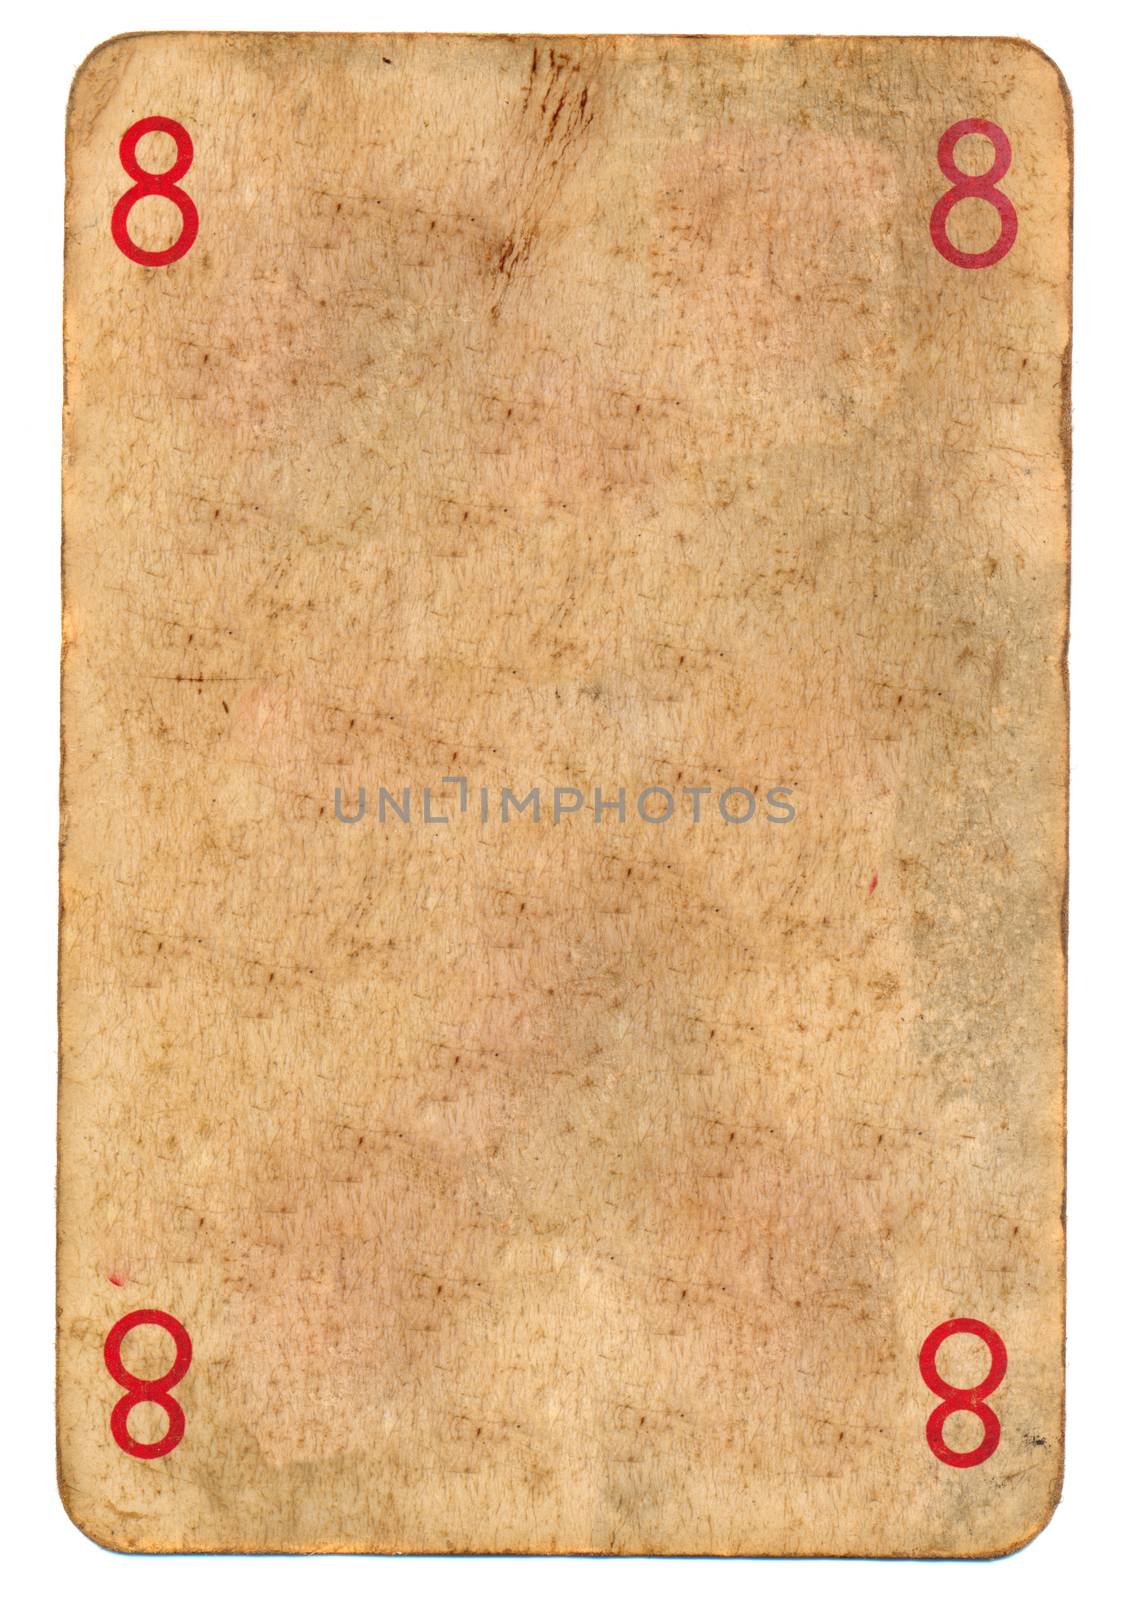 old used dirty empty playing card paper background isolated on white